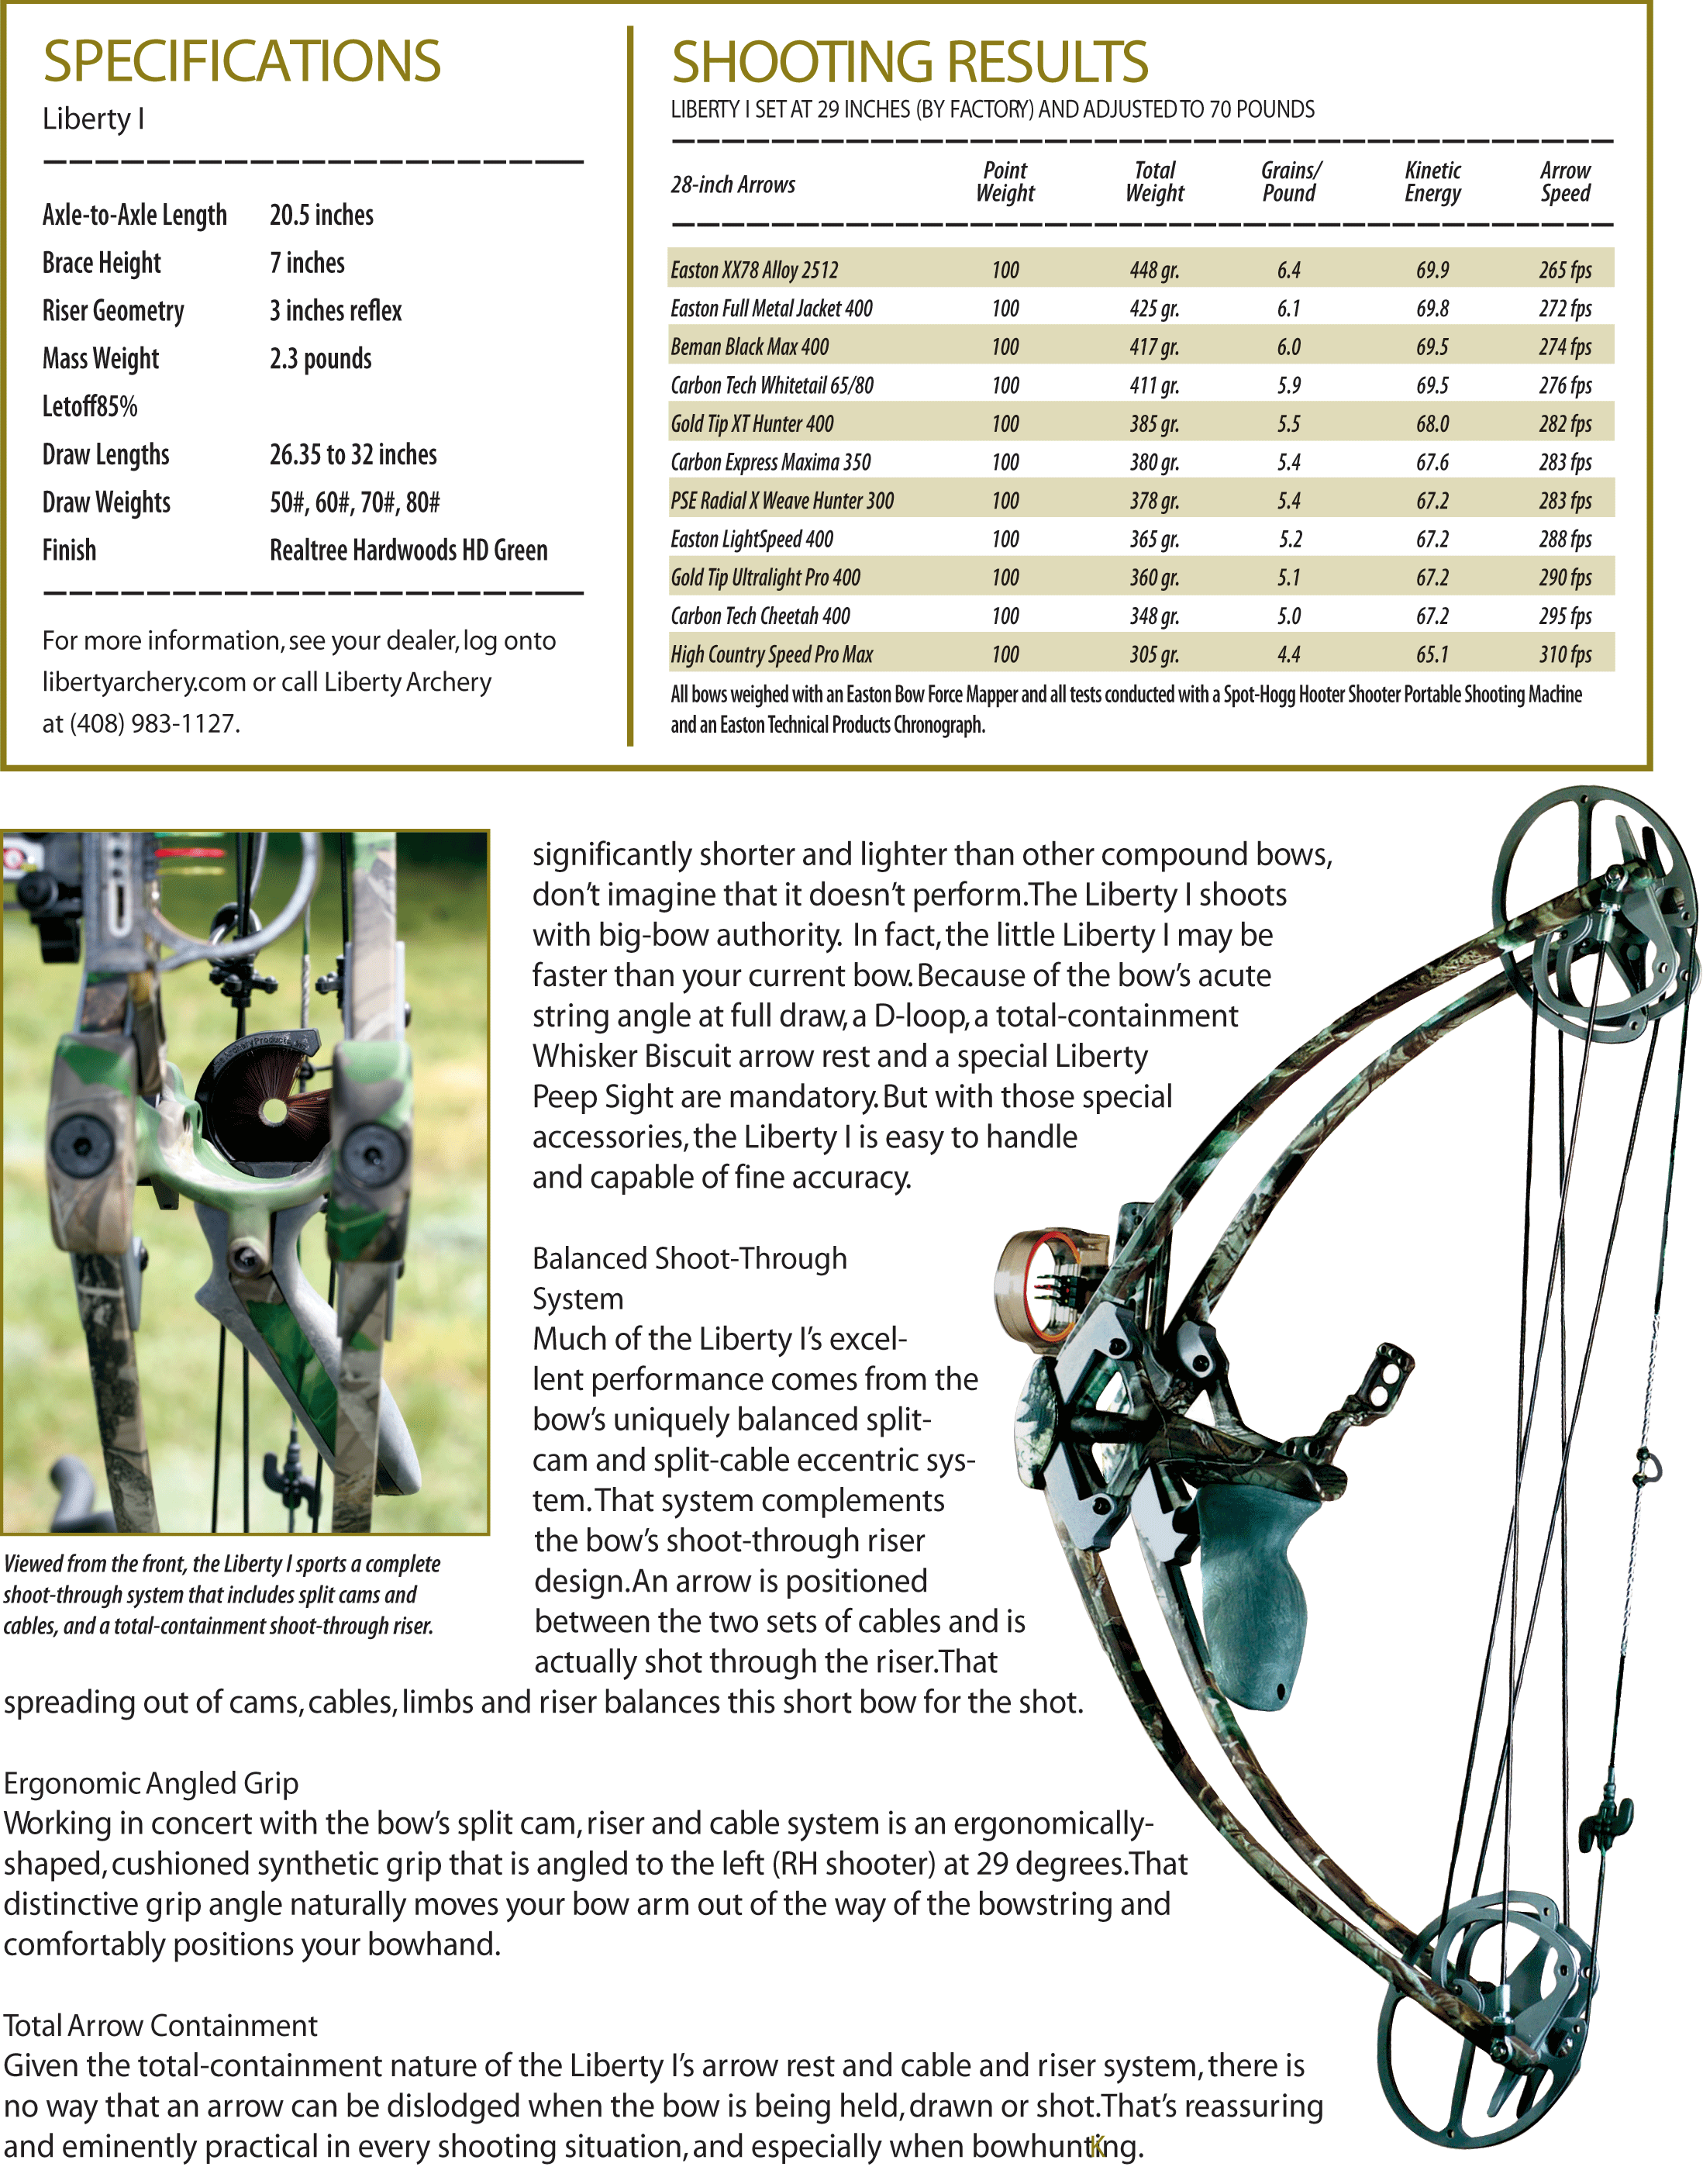 Bowhunt America Five Star bow review of Liberty Archery compound bow Pg 2.